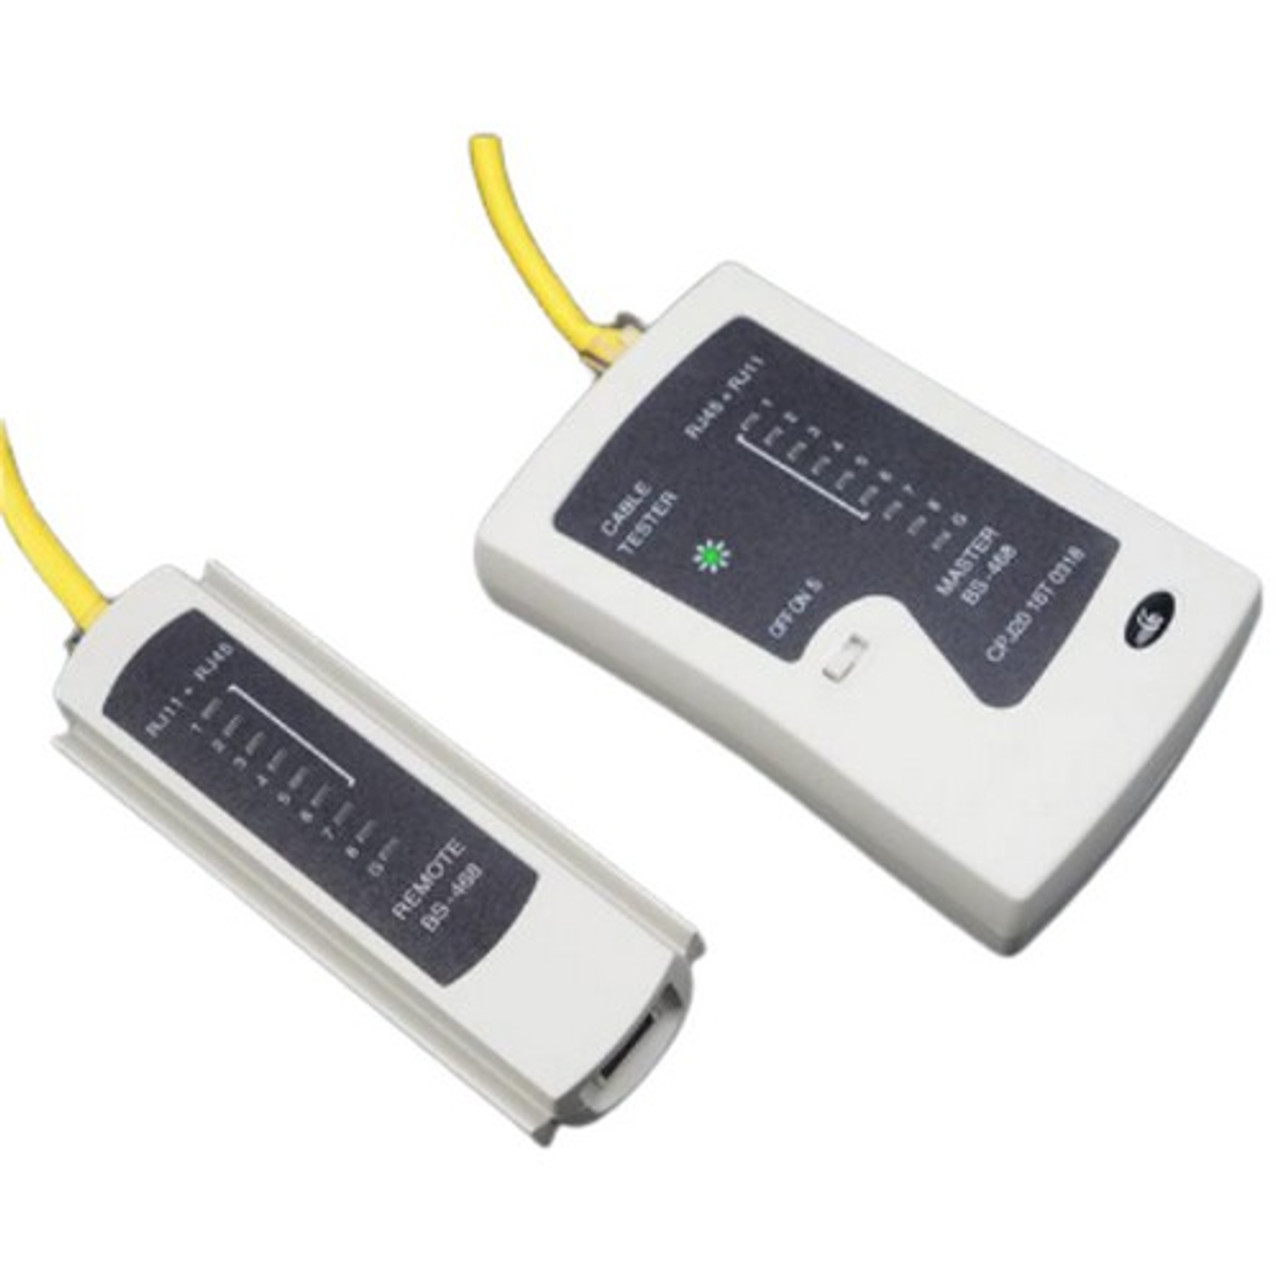 Network Cable Tester RJ45 RJ11, BS-468, AYOUB COMPUTERS